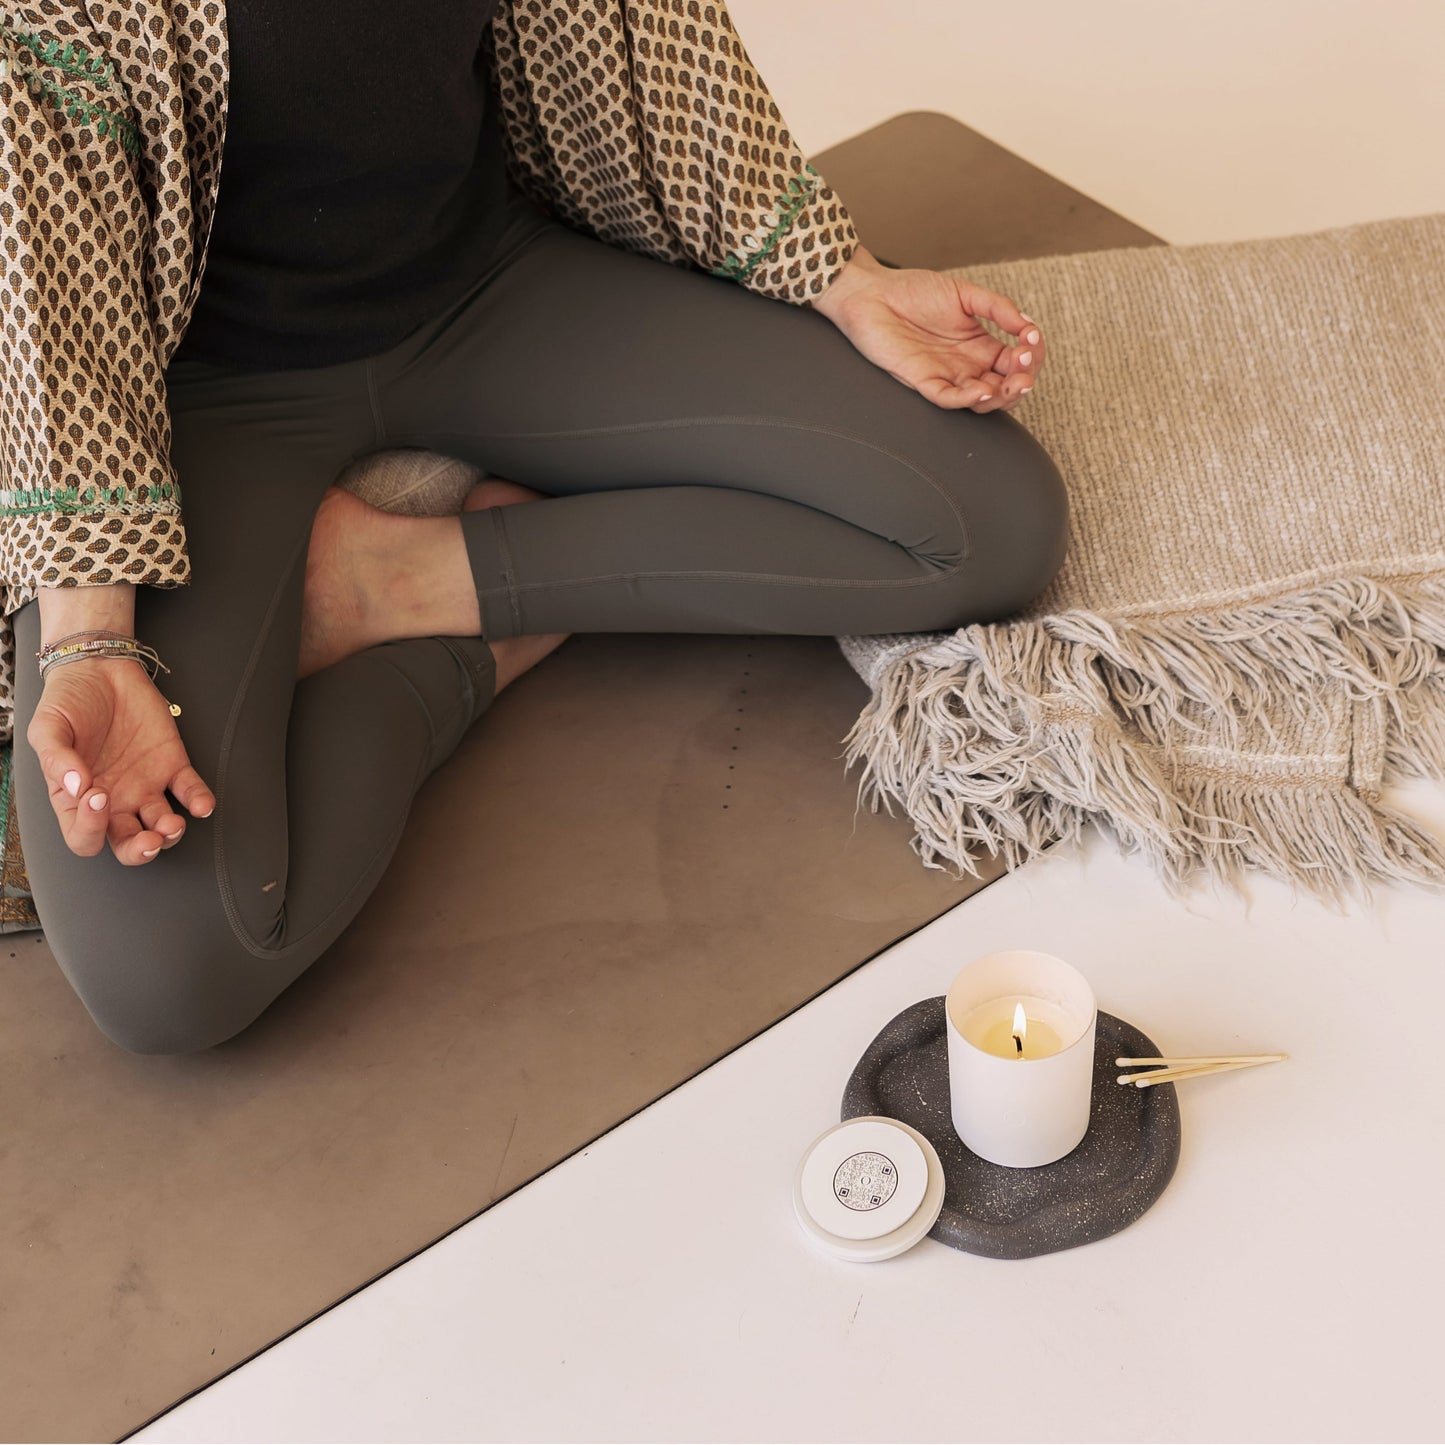 Shō-moon Meditation Candle and someone meditating with a candle